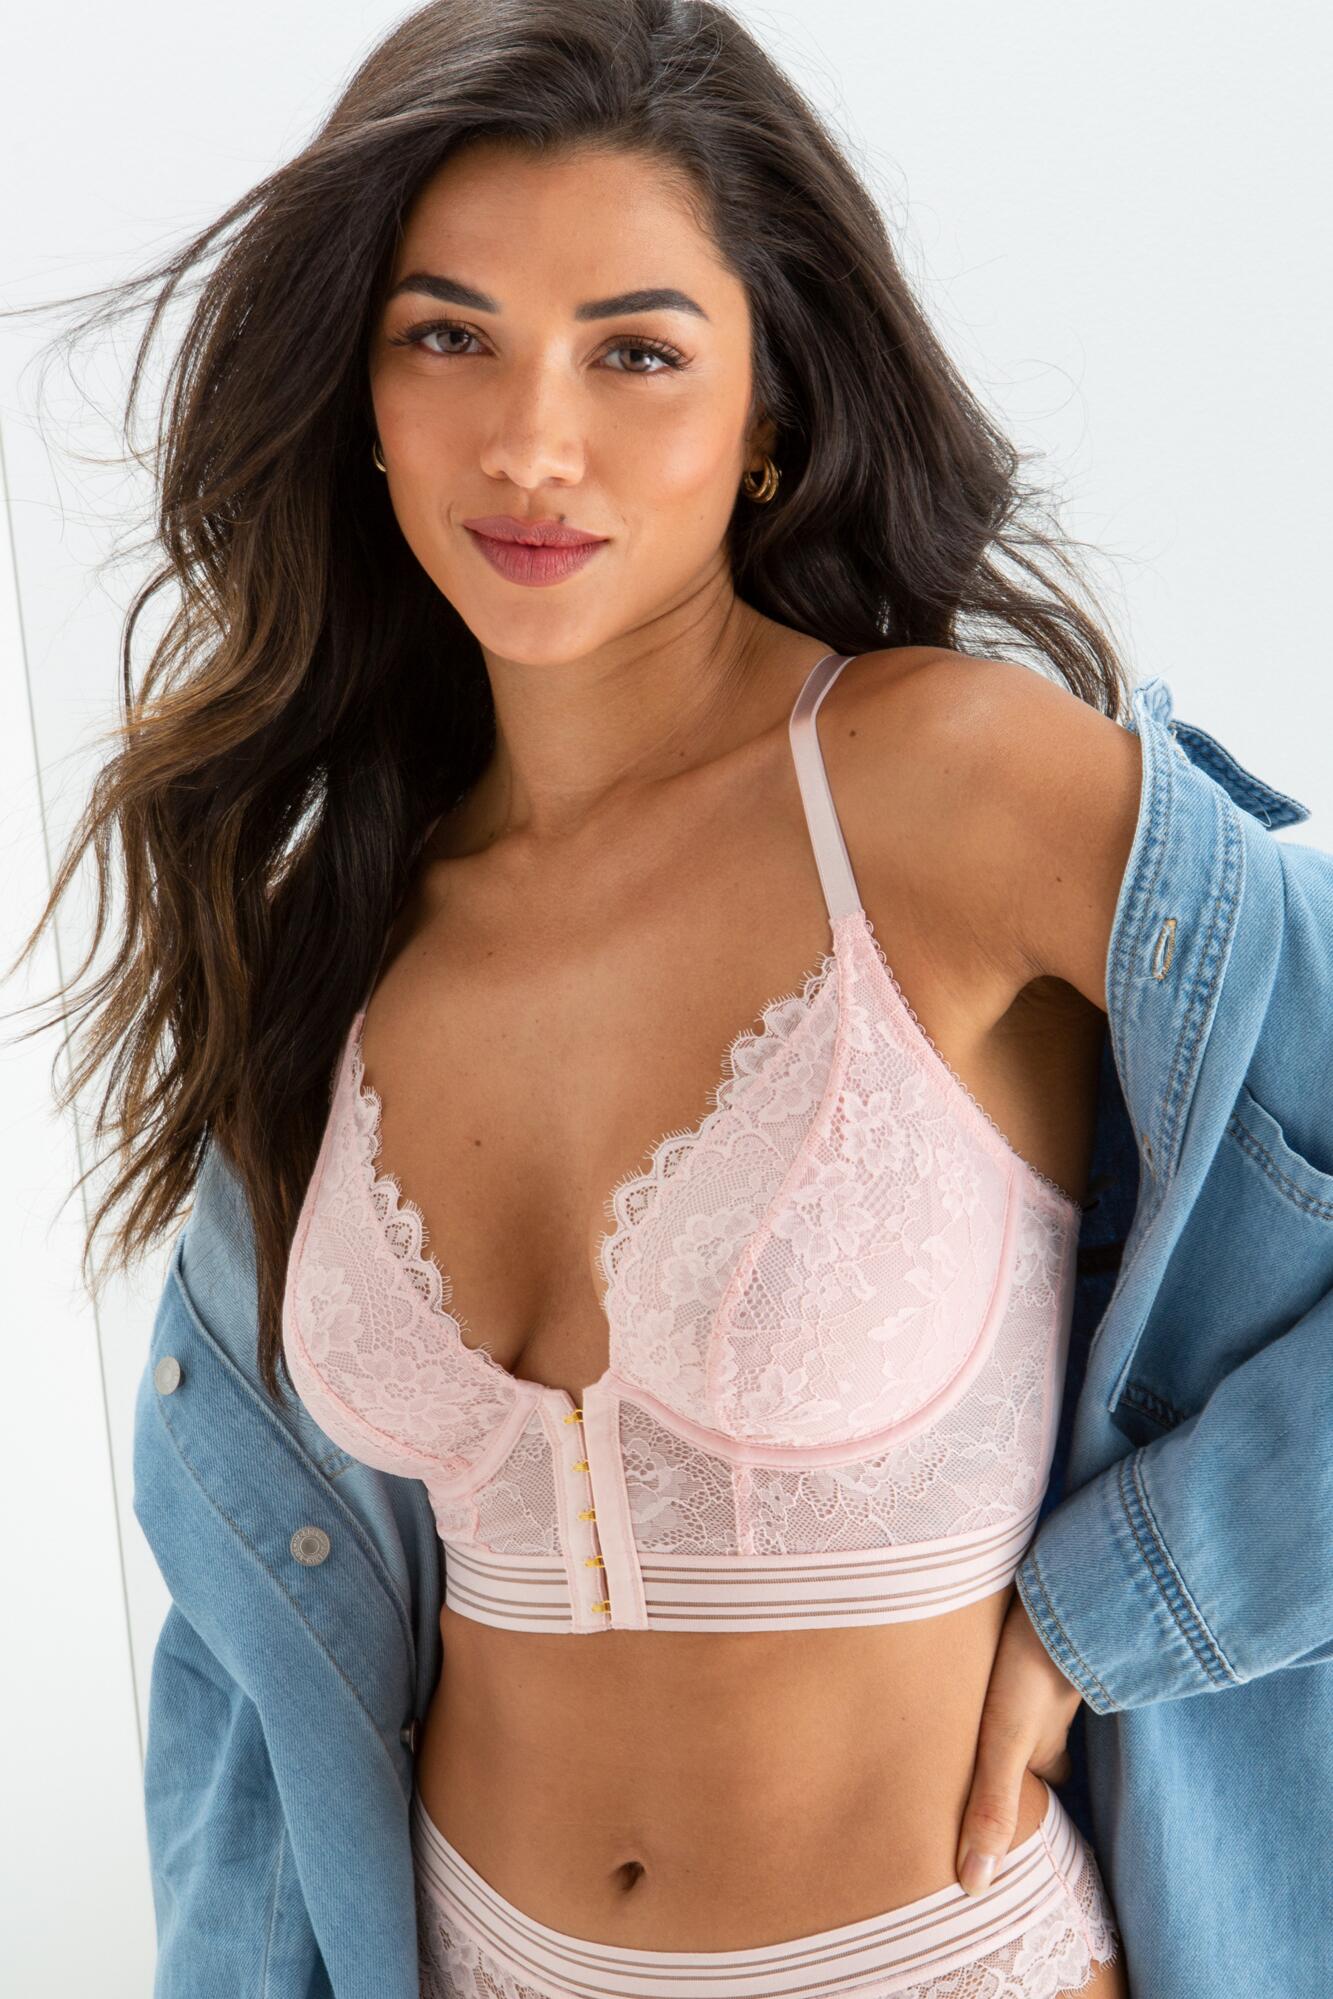 Pour Moi Opulence Front Fastening Underwired Bralette - Belle Lingerie  Pour  Moi Opulence Front Fastening Underwired Bralette - Belle Lingerie